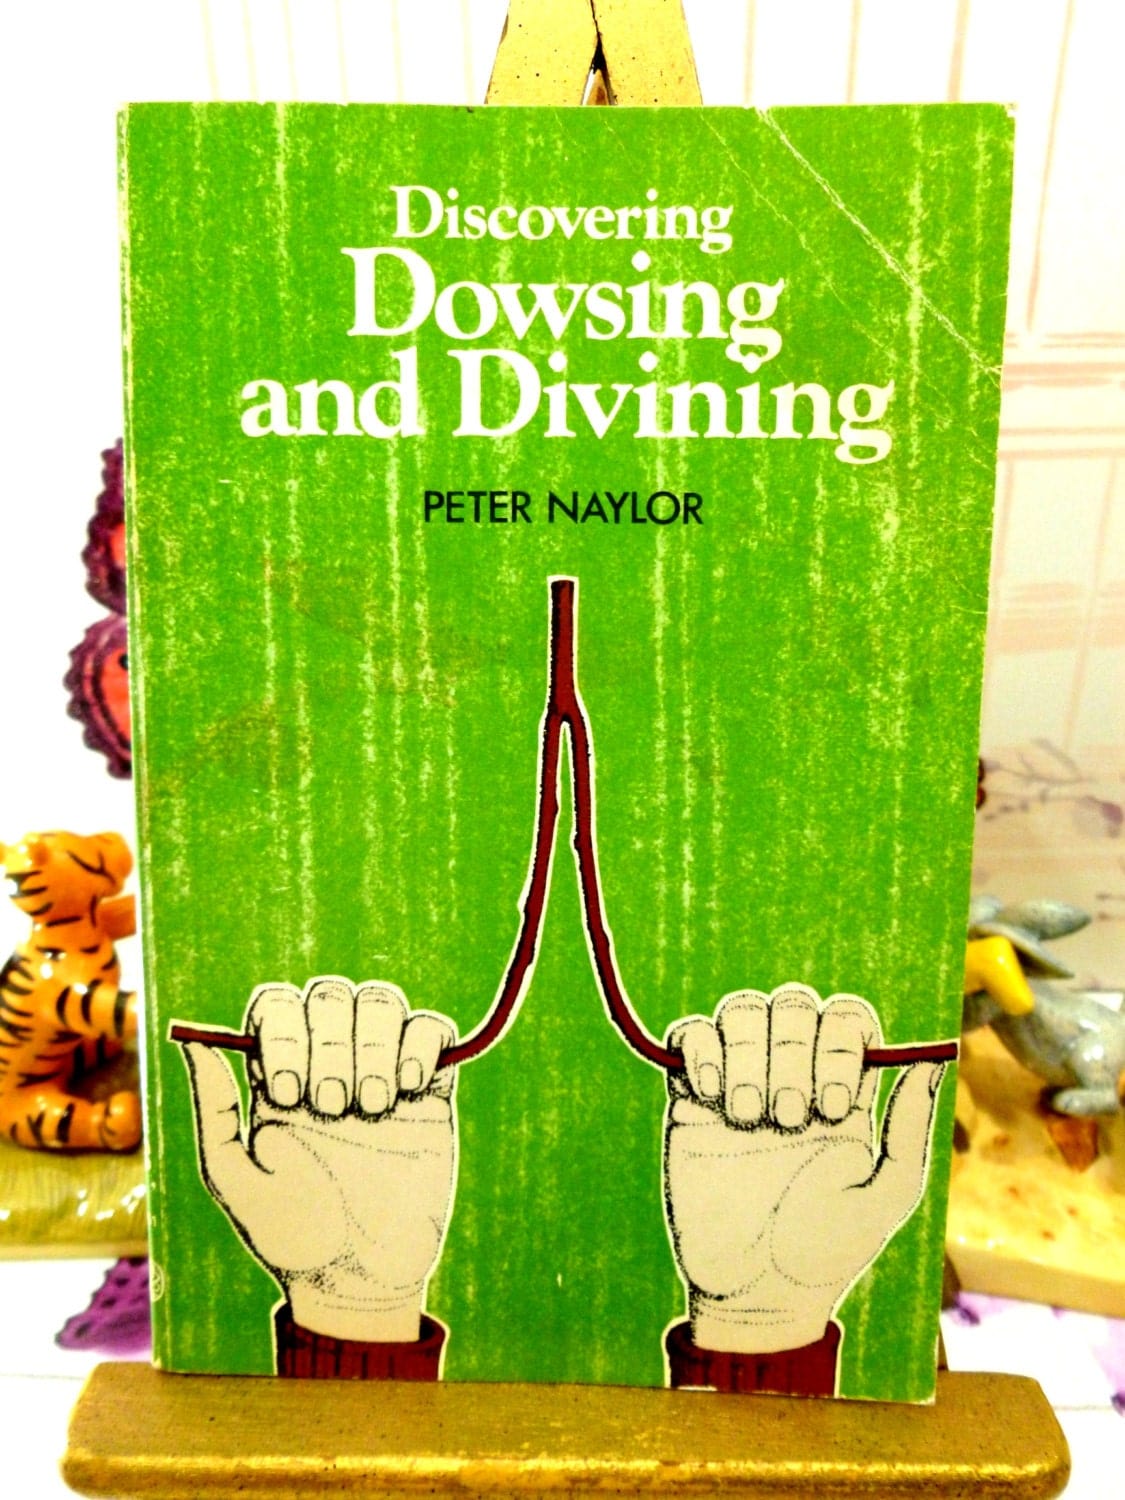 Dowsing and Divining Discovering  How to Dowse with Metal Rods Twig and Pendulums Guidebook fully illustrated